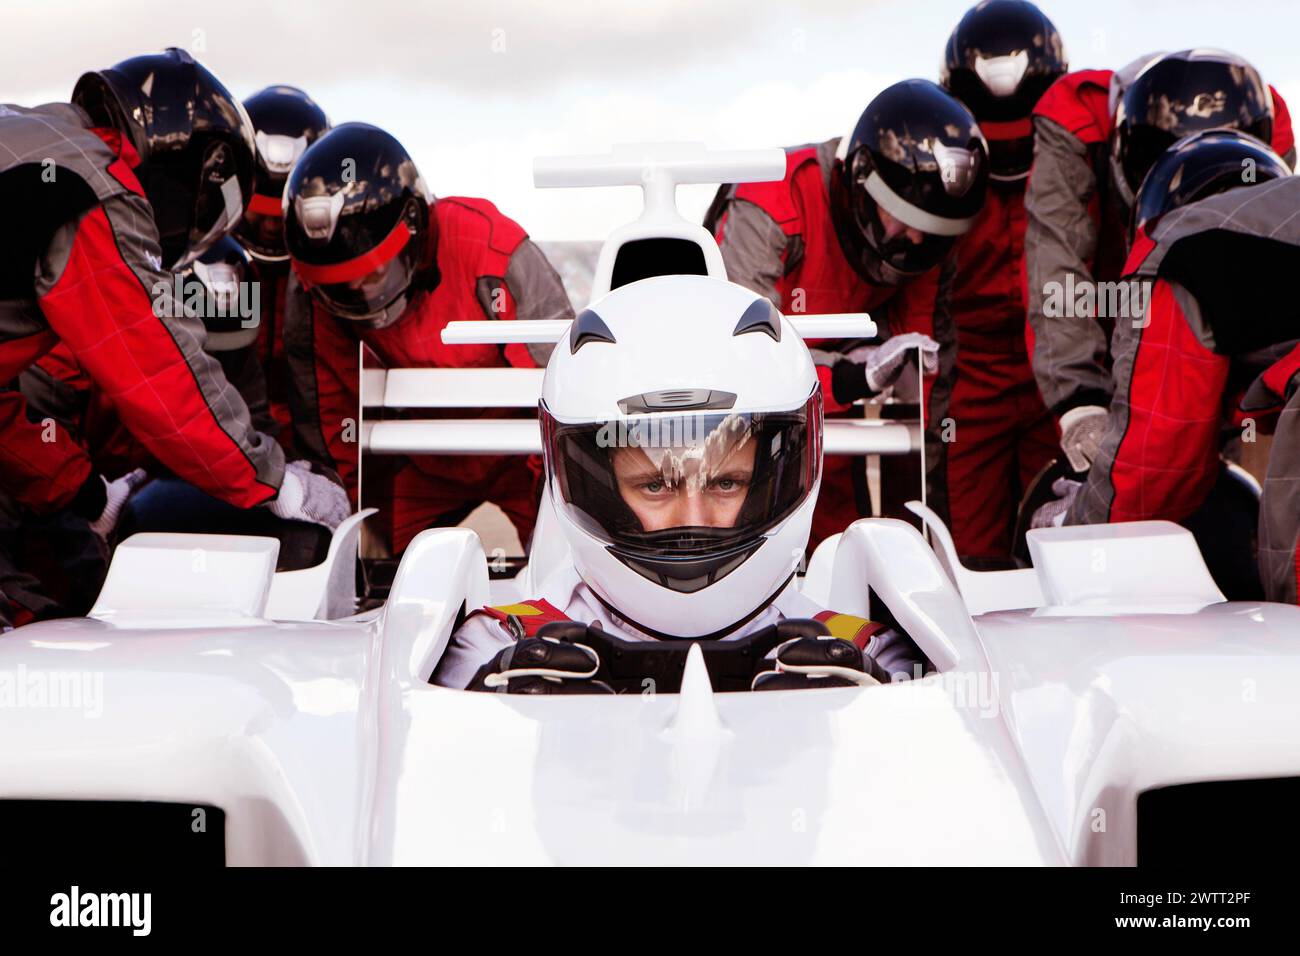 Race car driver focused at the starting line with a pit crew ready for action. Stock Photo